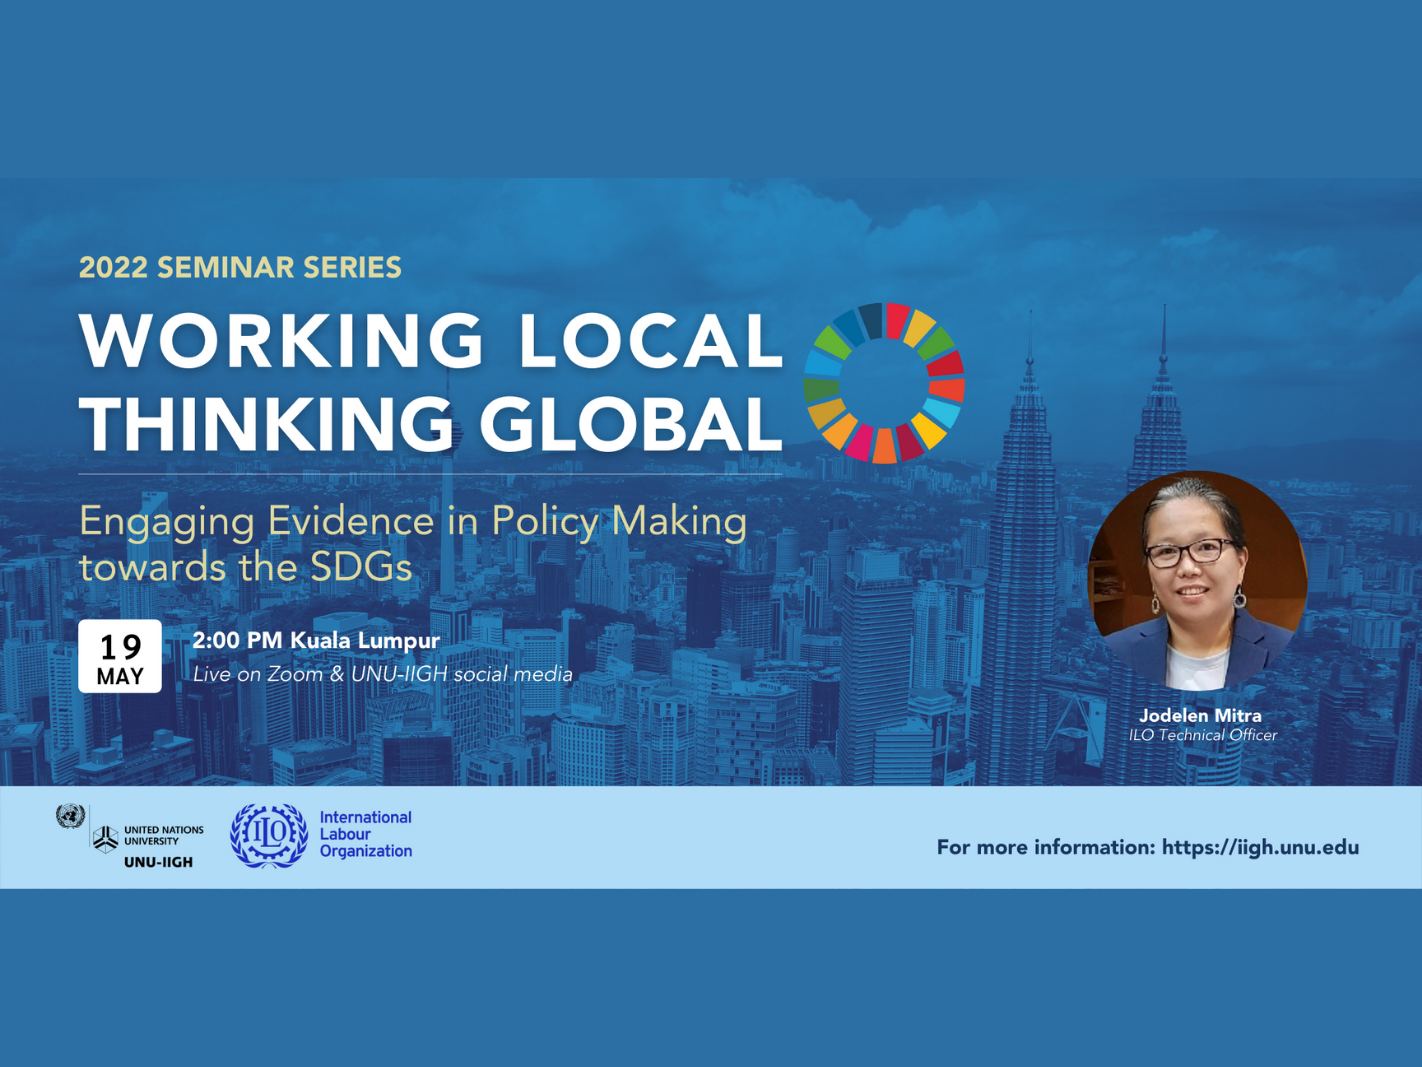 Working Local, Thinking Global Seminar: Engaging Evidence in Policy Making towards the SDGs